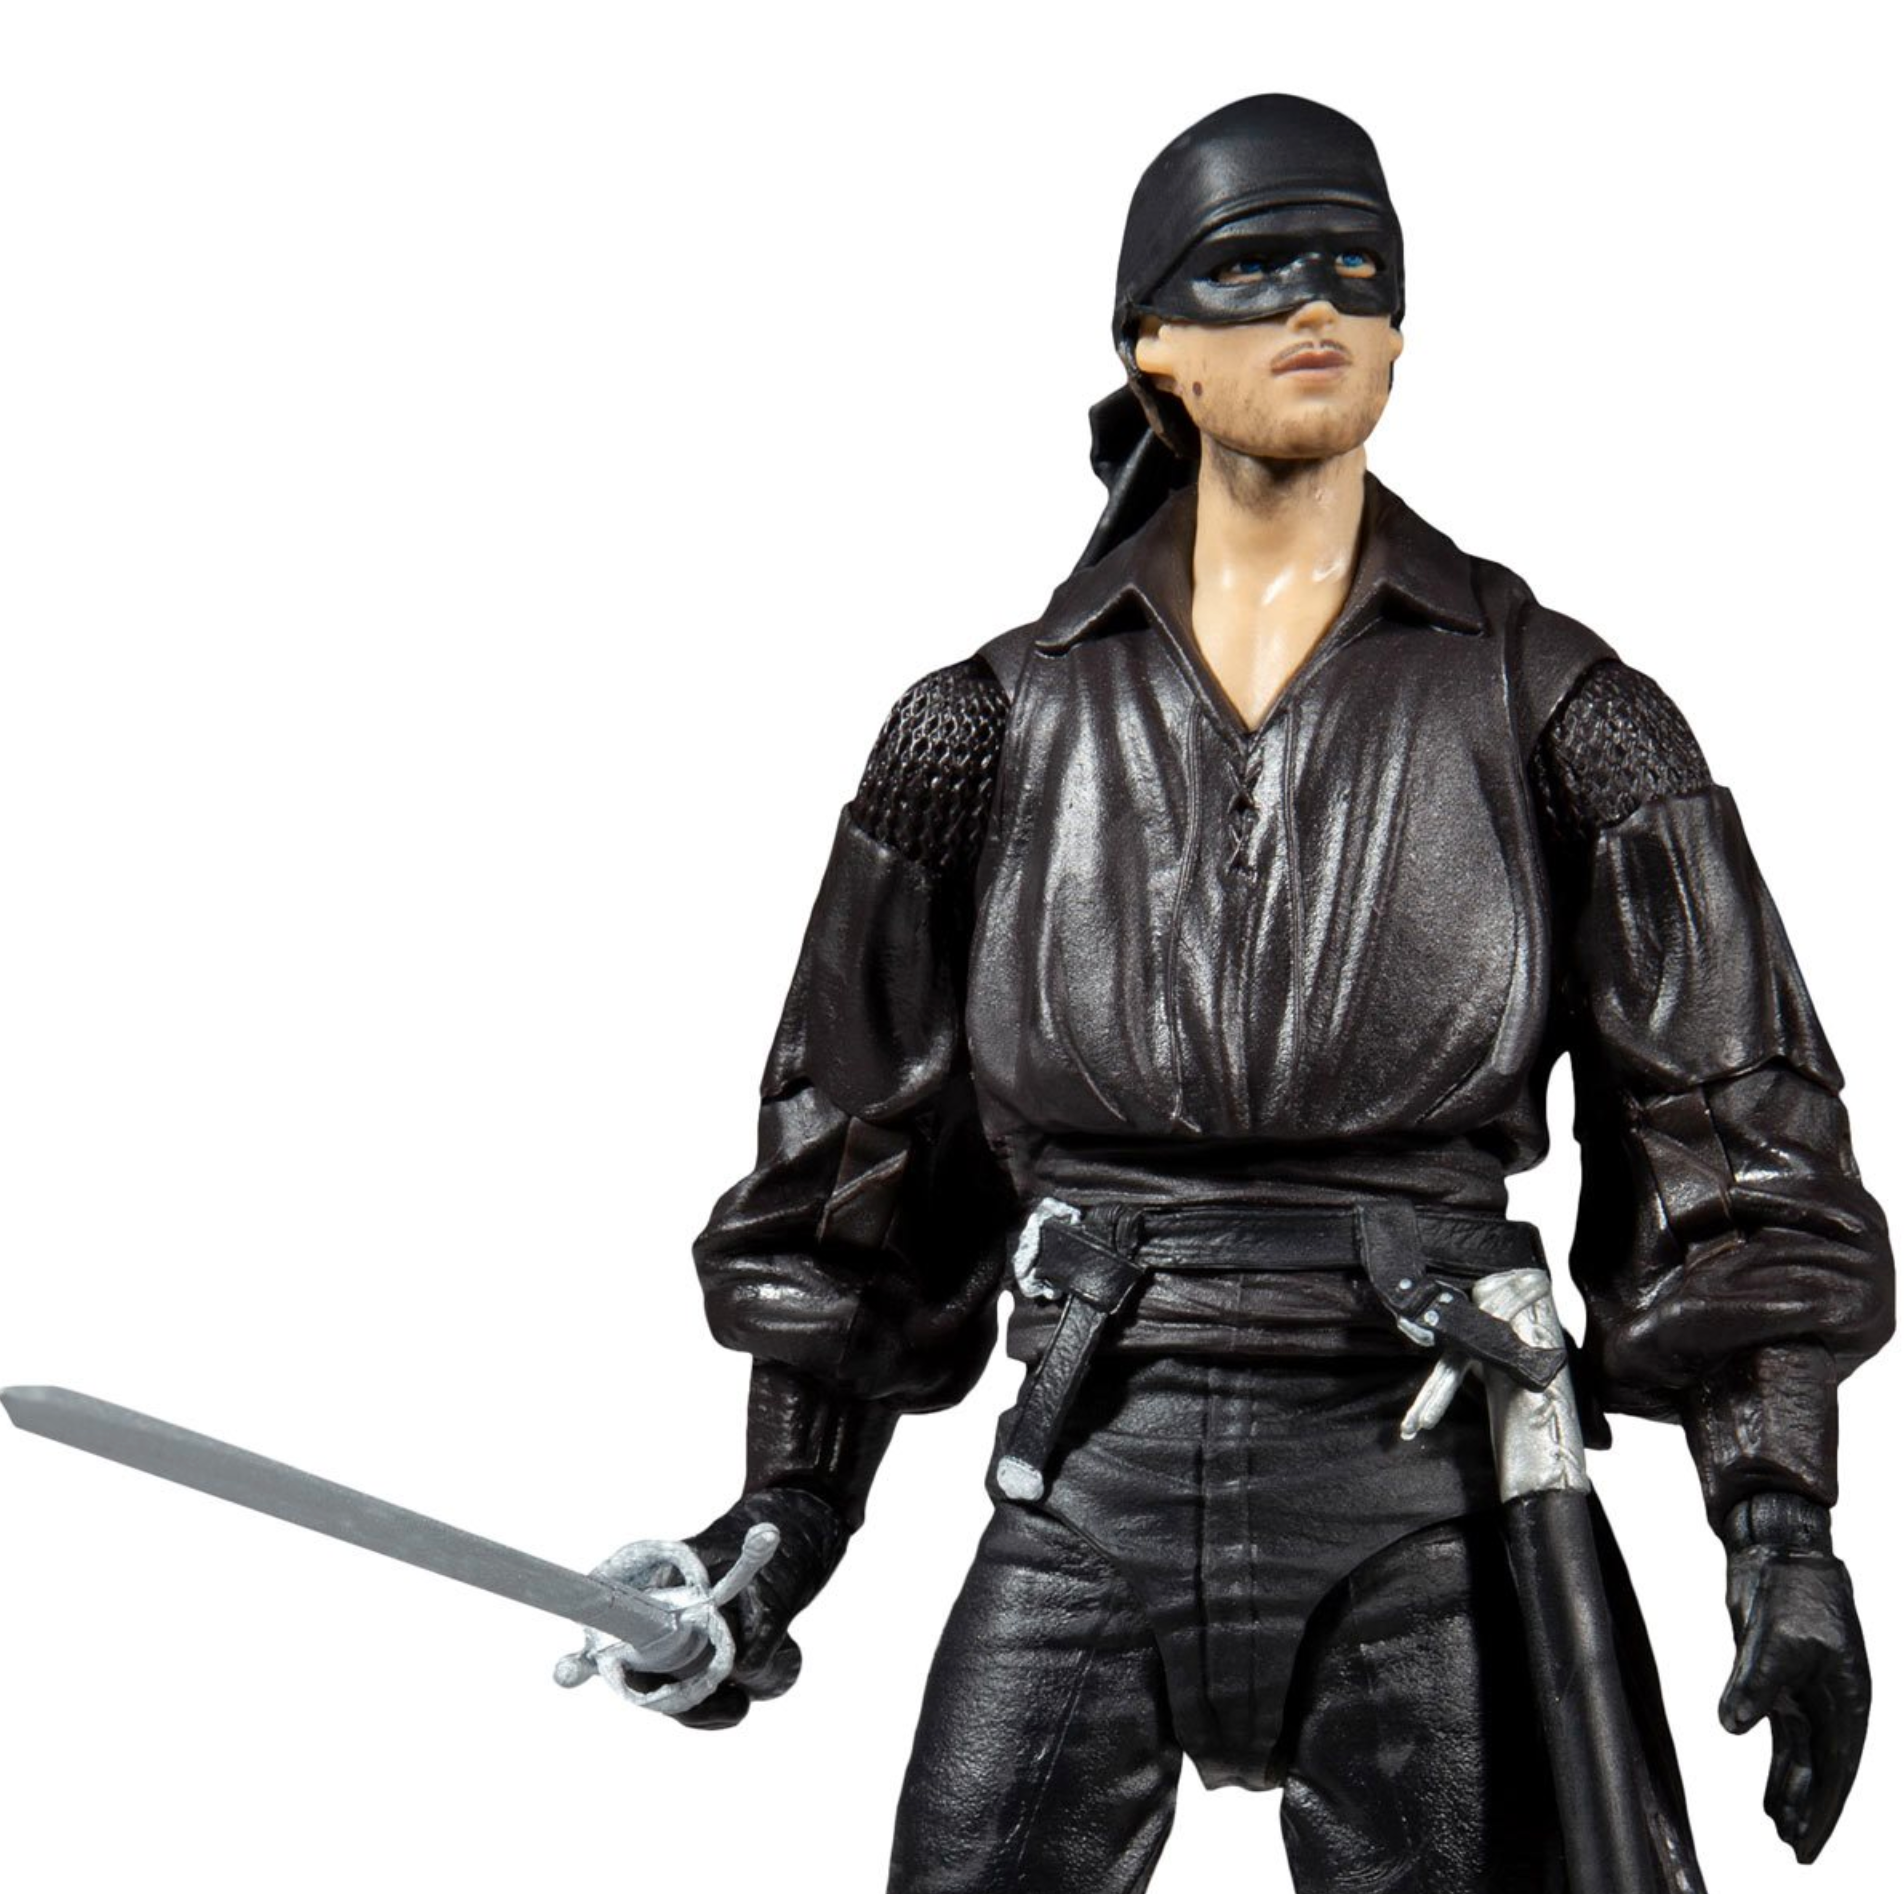 The Princess Bride's Dread Pirate Roberts (Westley) 7-Inch Action Figure (McFarlane Toys)